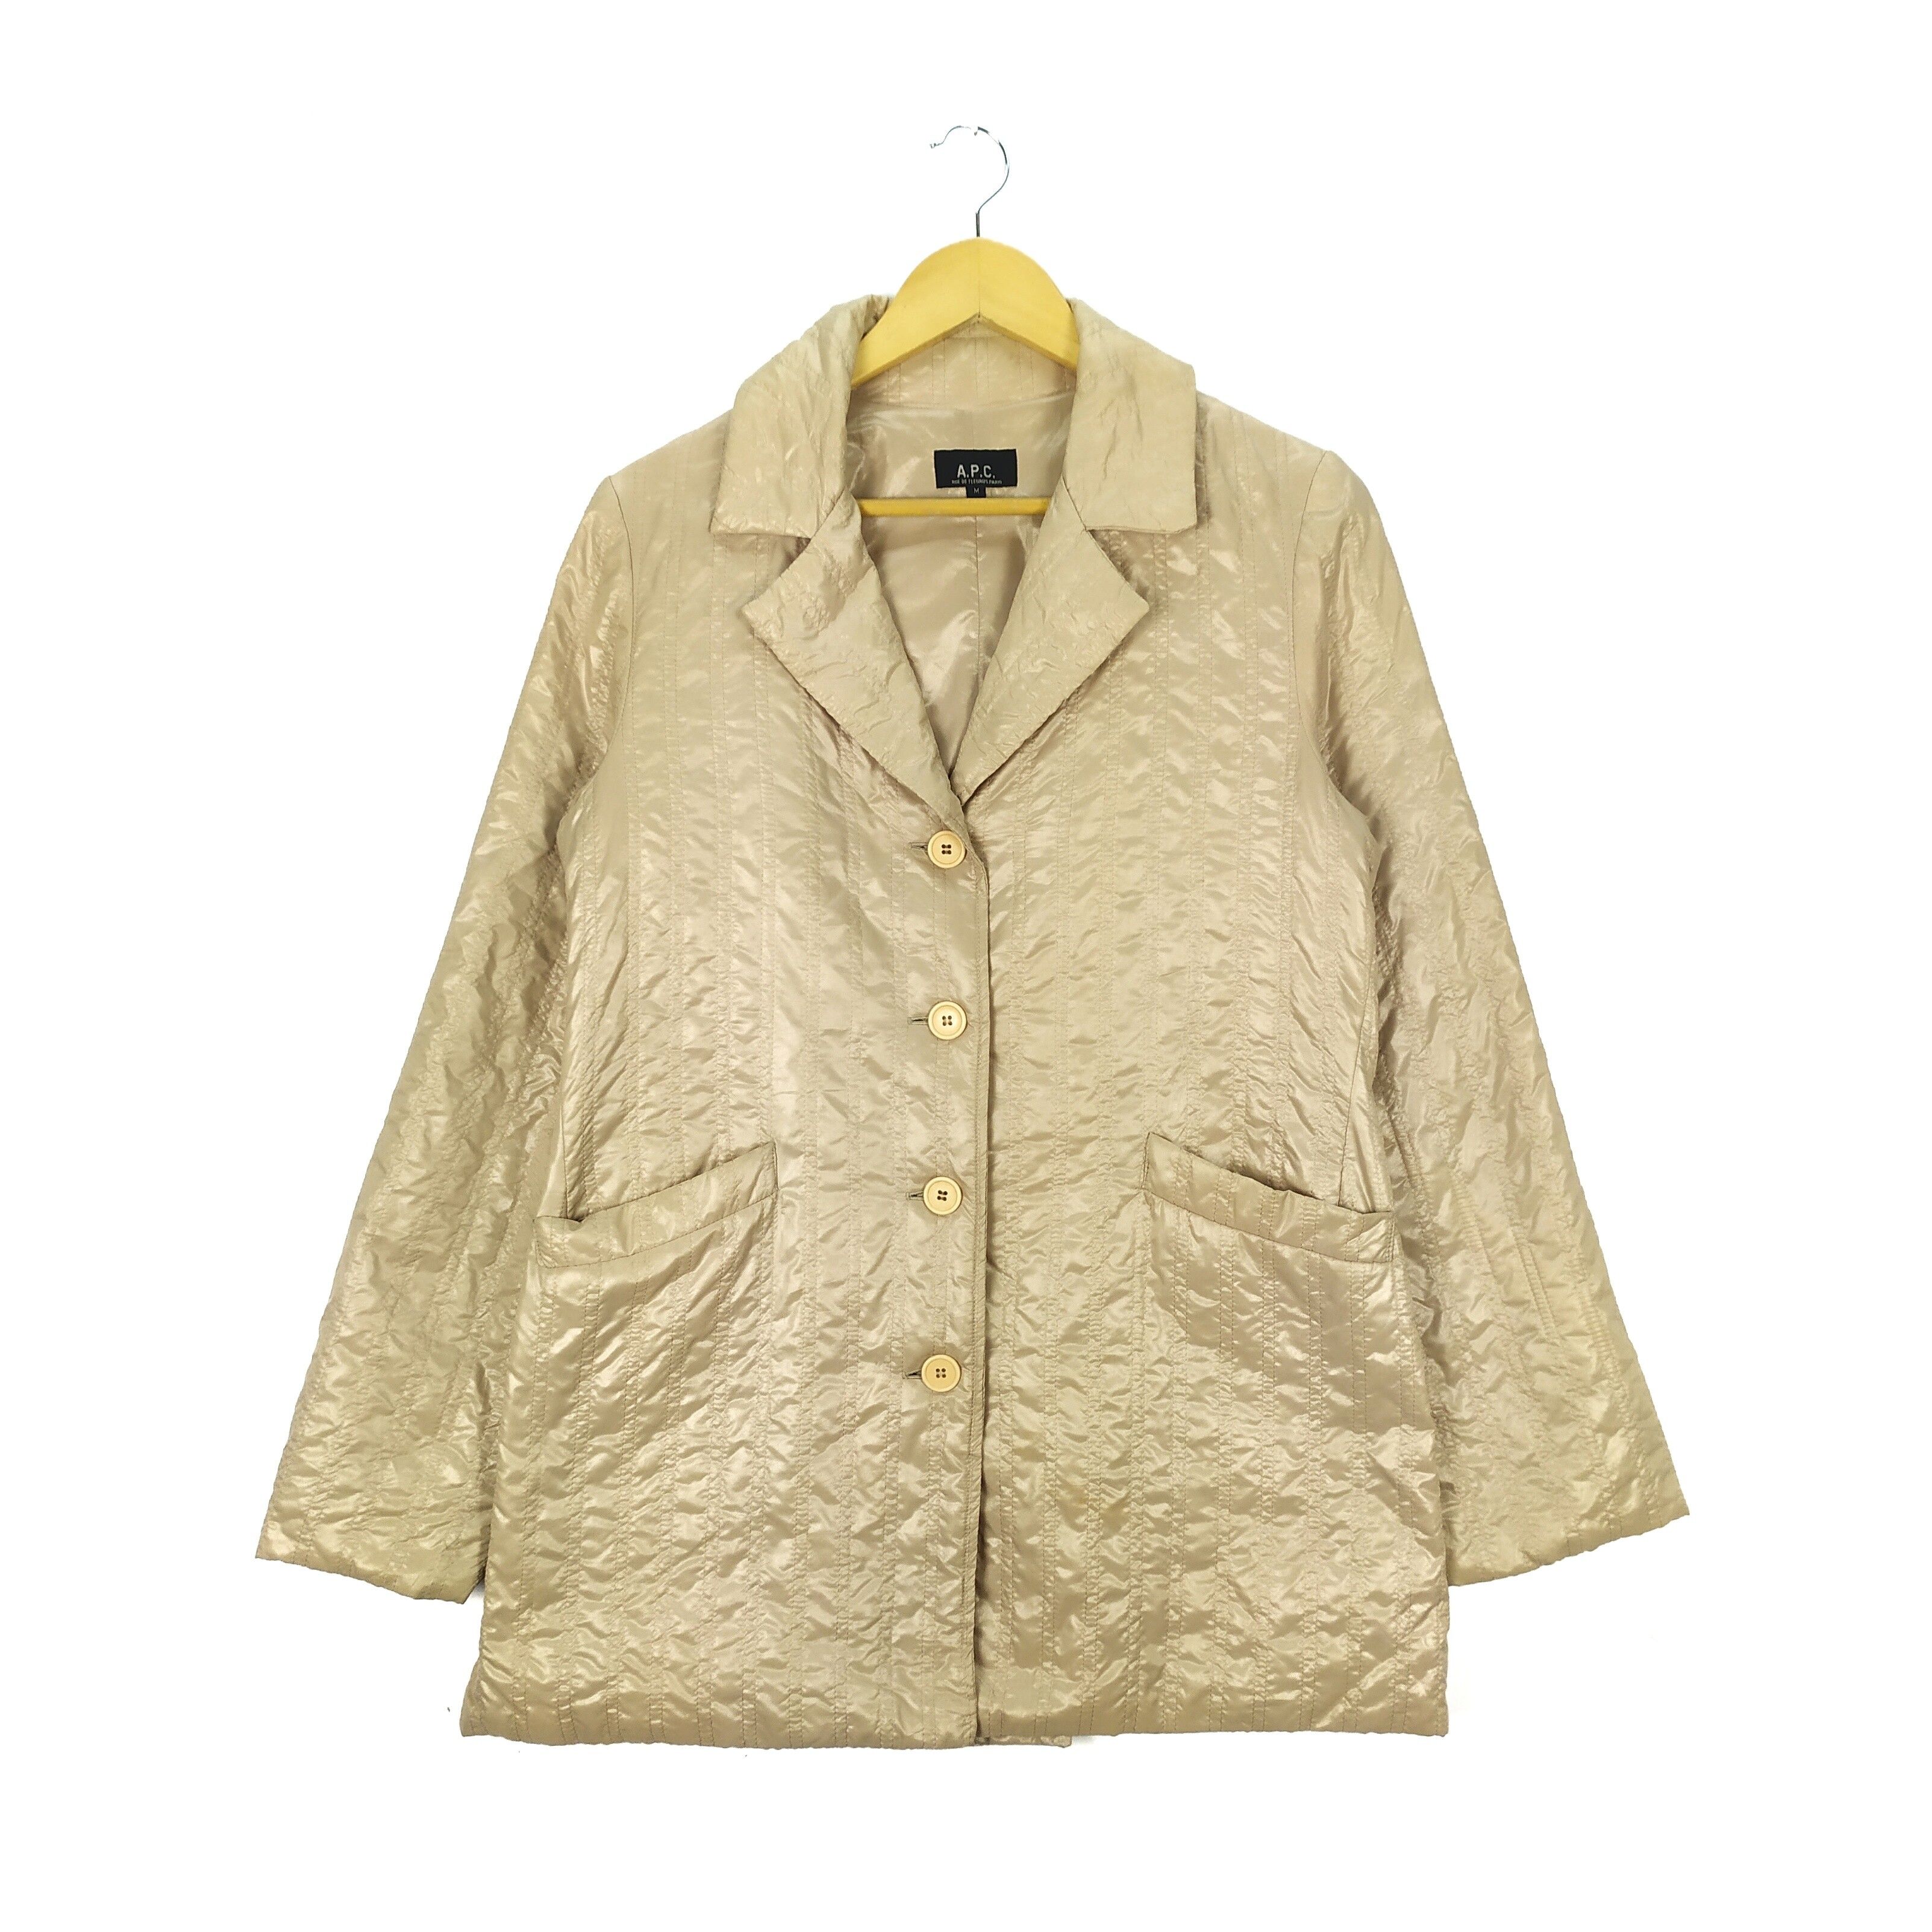 A.P.C Button Up Light Jacket Made in Japan - 1